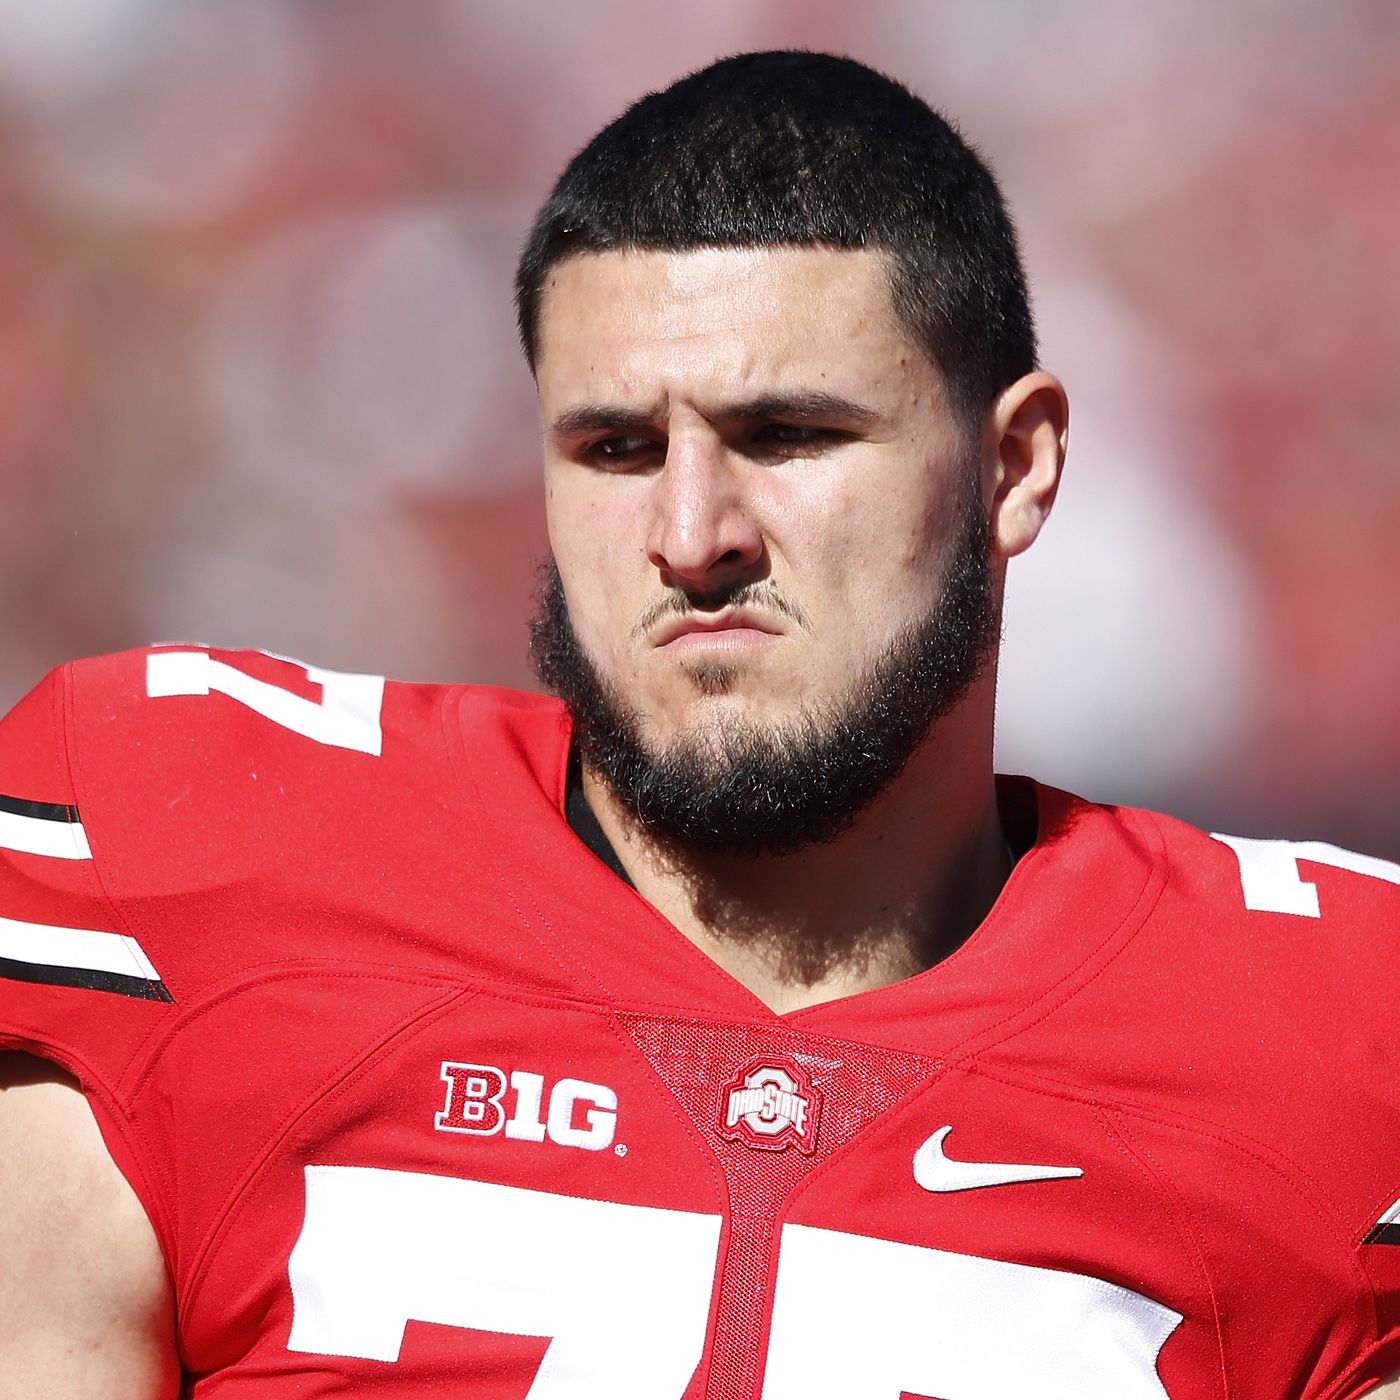 Ohio State's Kevin Feder is the latest graduate transfer OT